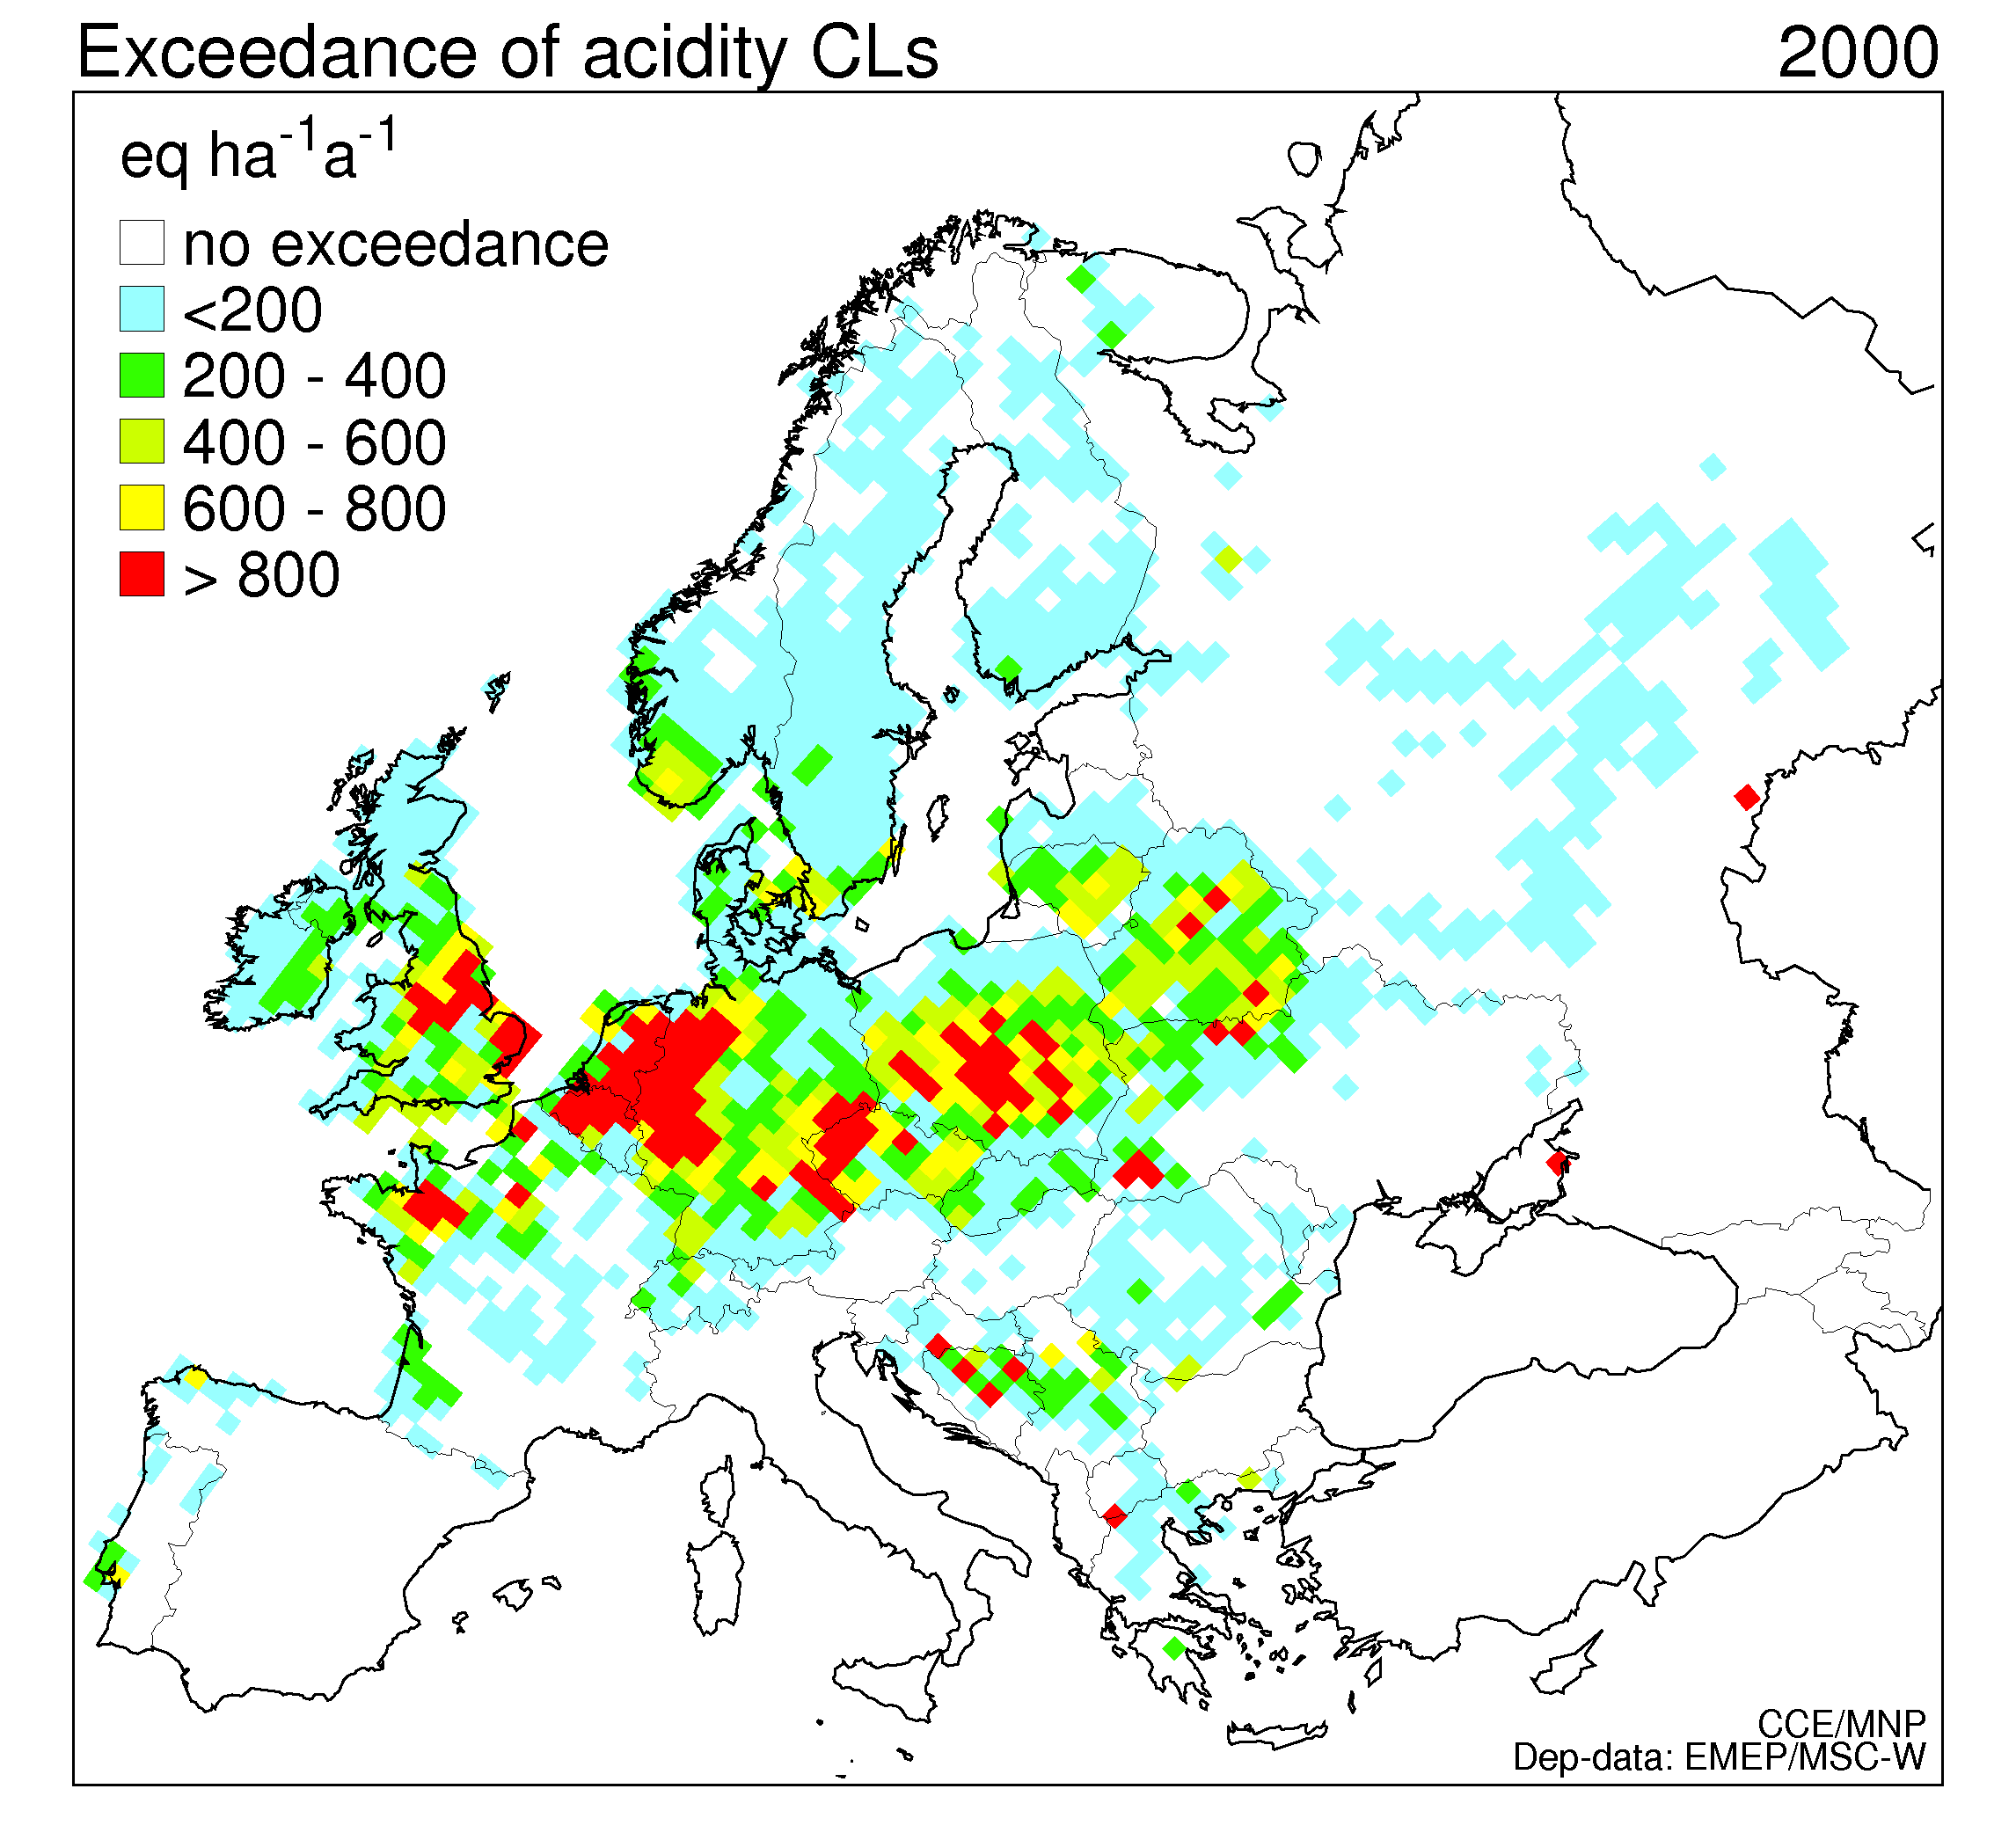 Exceedance of the critical loads for acidity in Europe (as average accumulated exceedances), 2000